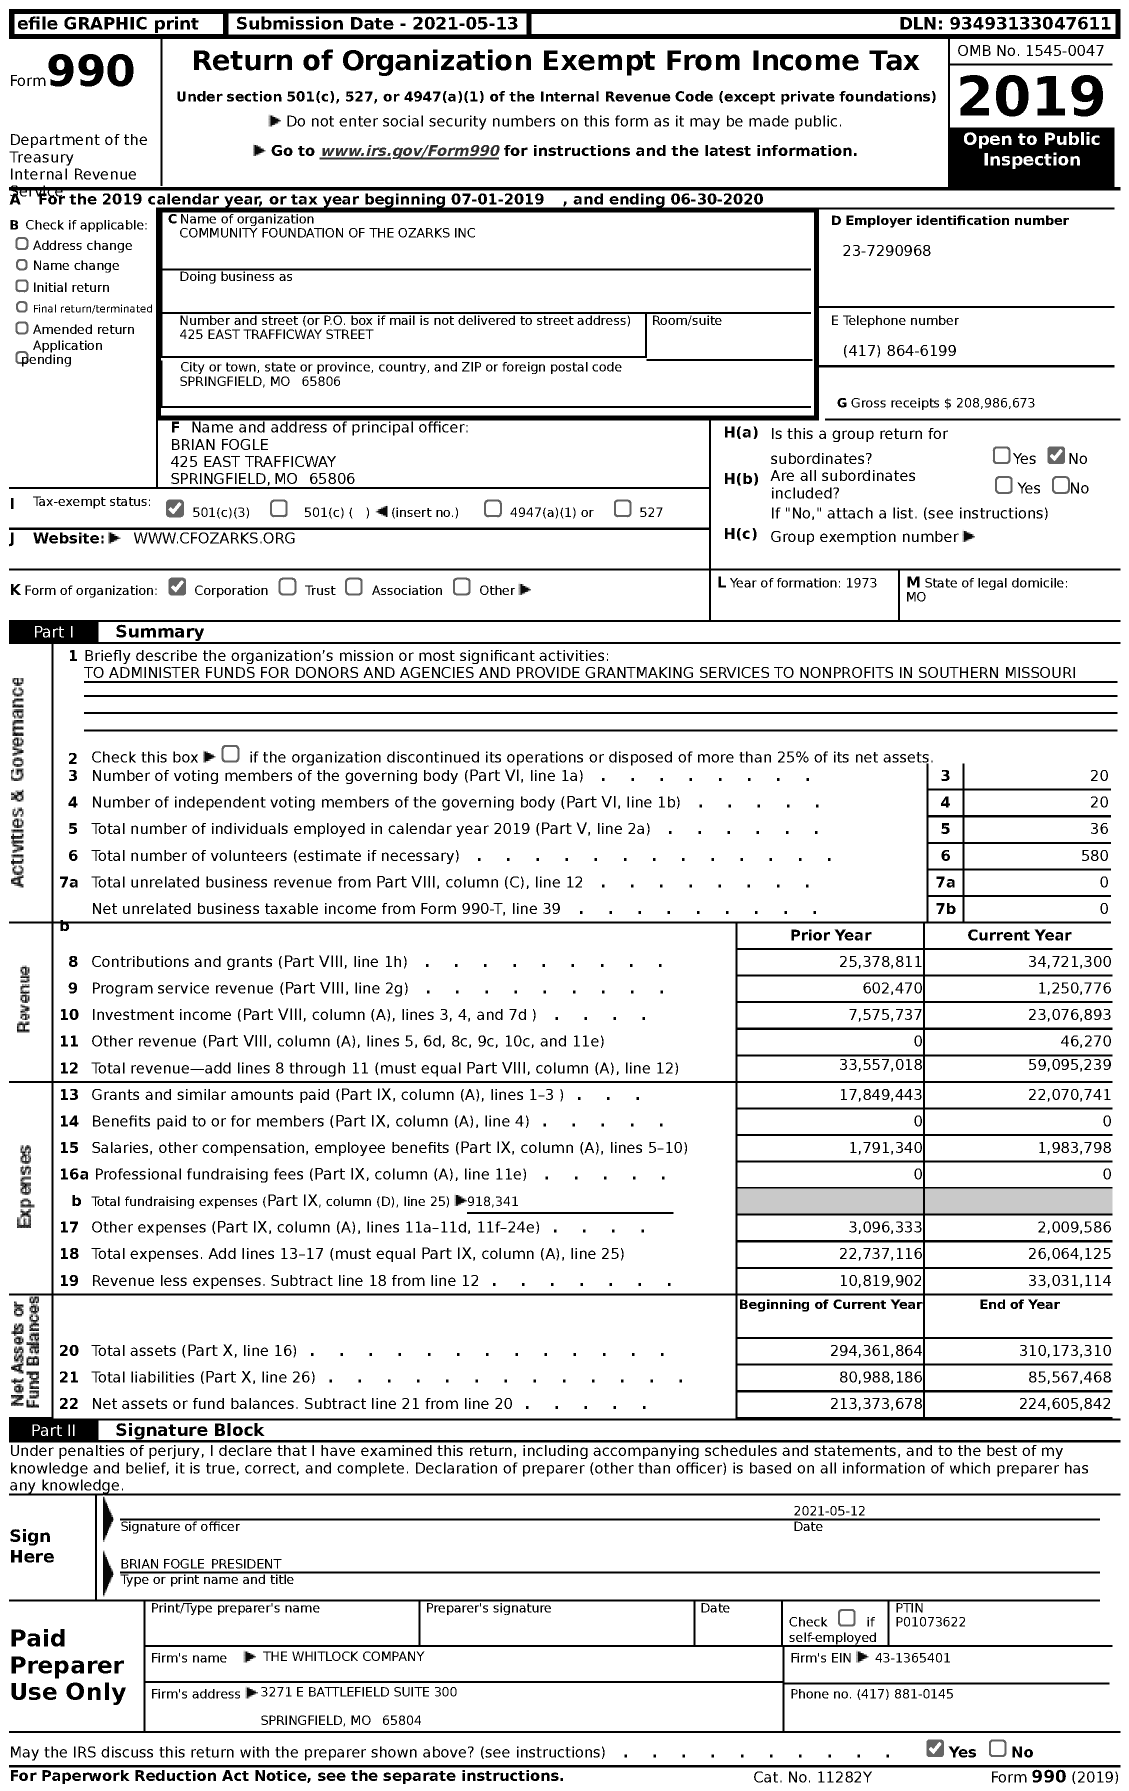 Image of first page of 2019 Form 990 for Community Foundation of the Ozarks (CFO)